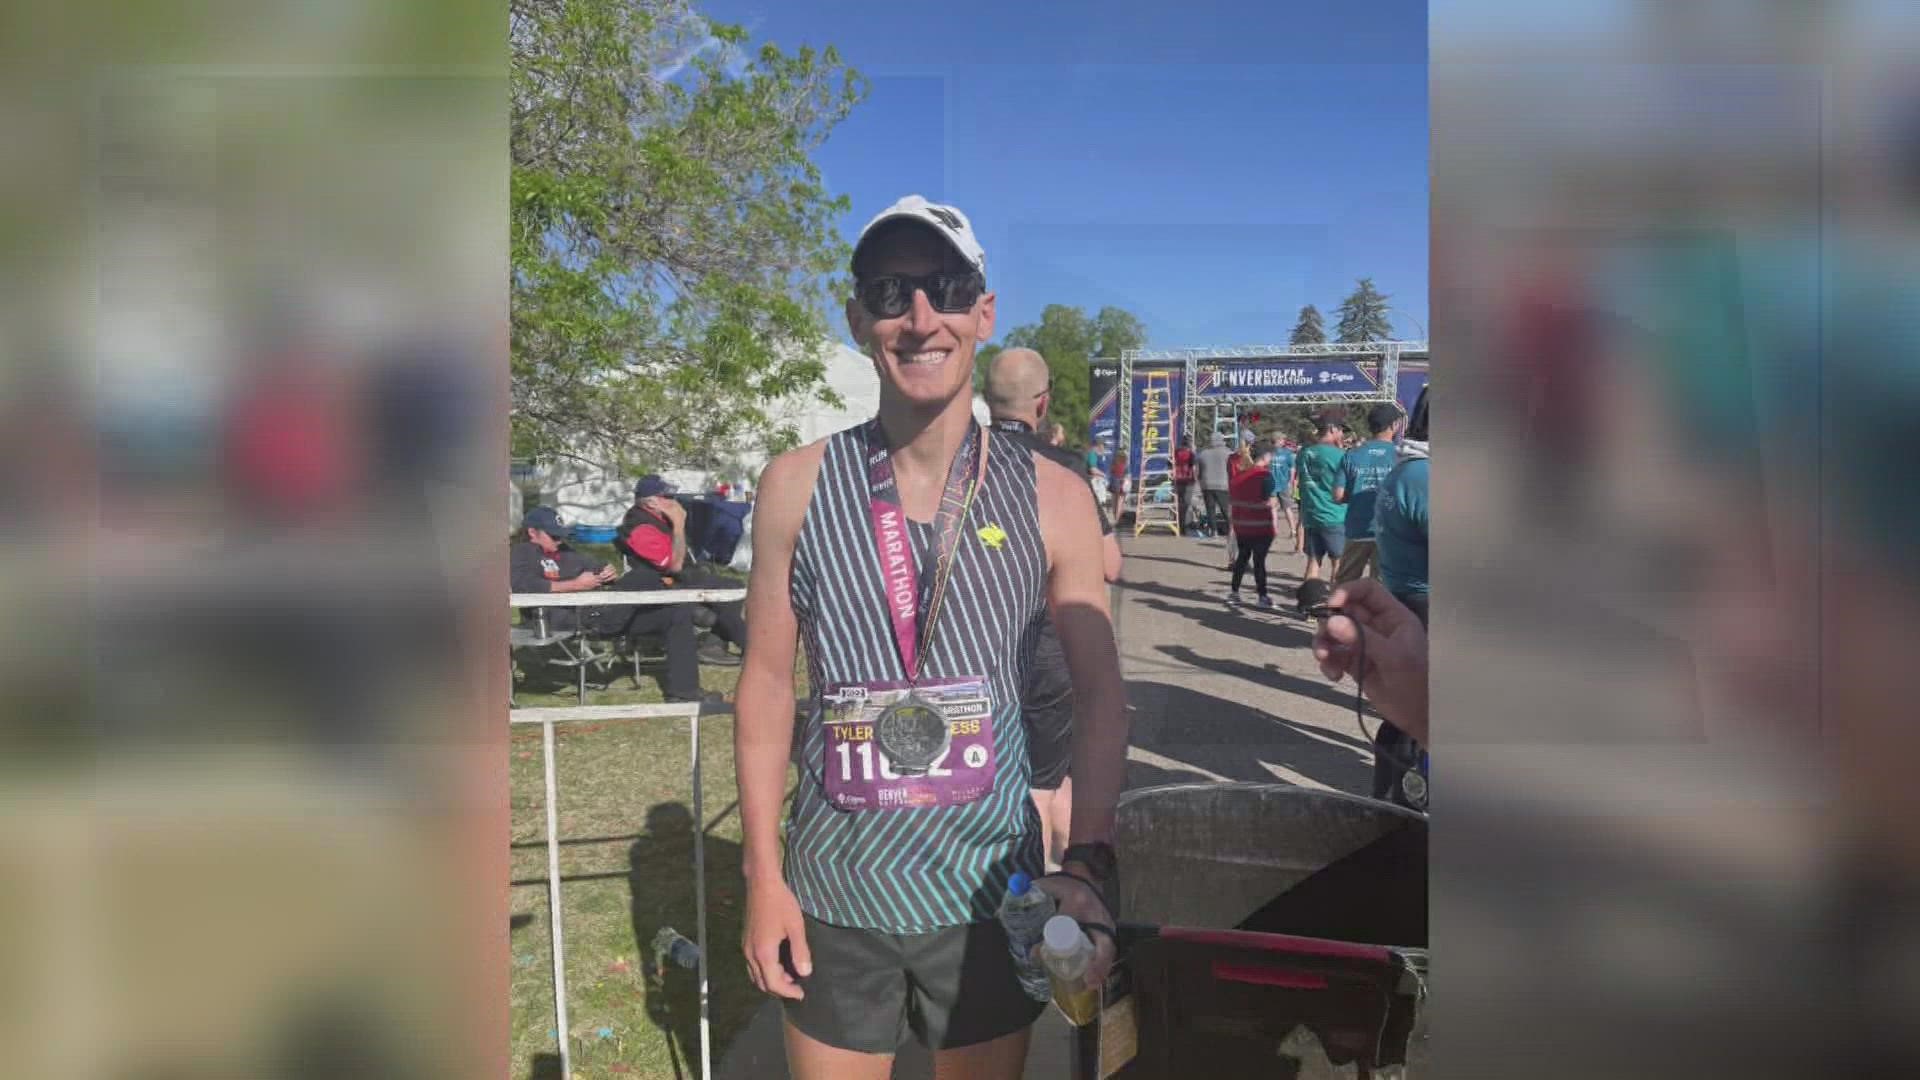 Tyler McCandless, of Fort Collins, set a new course record for the race and has his eyes on the Olympic marathon trials.